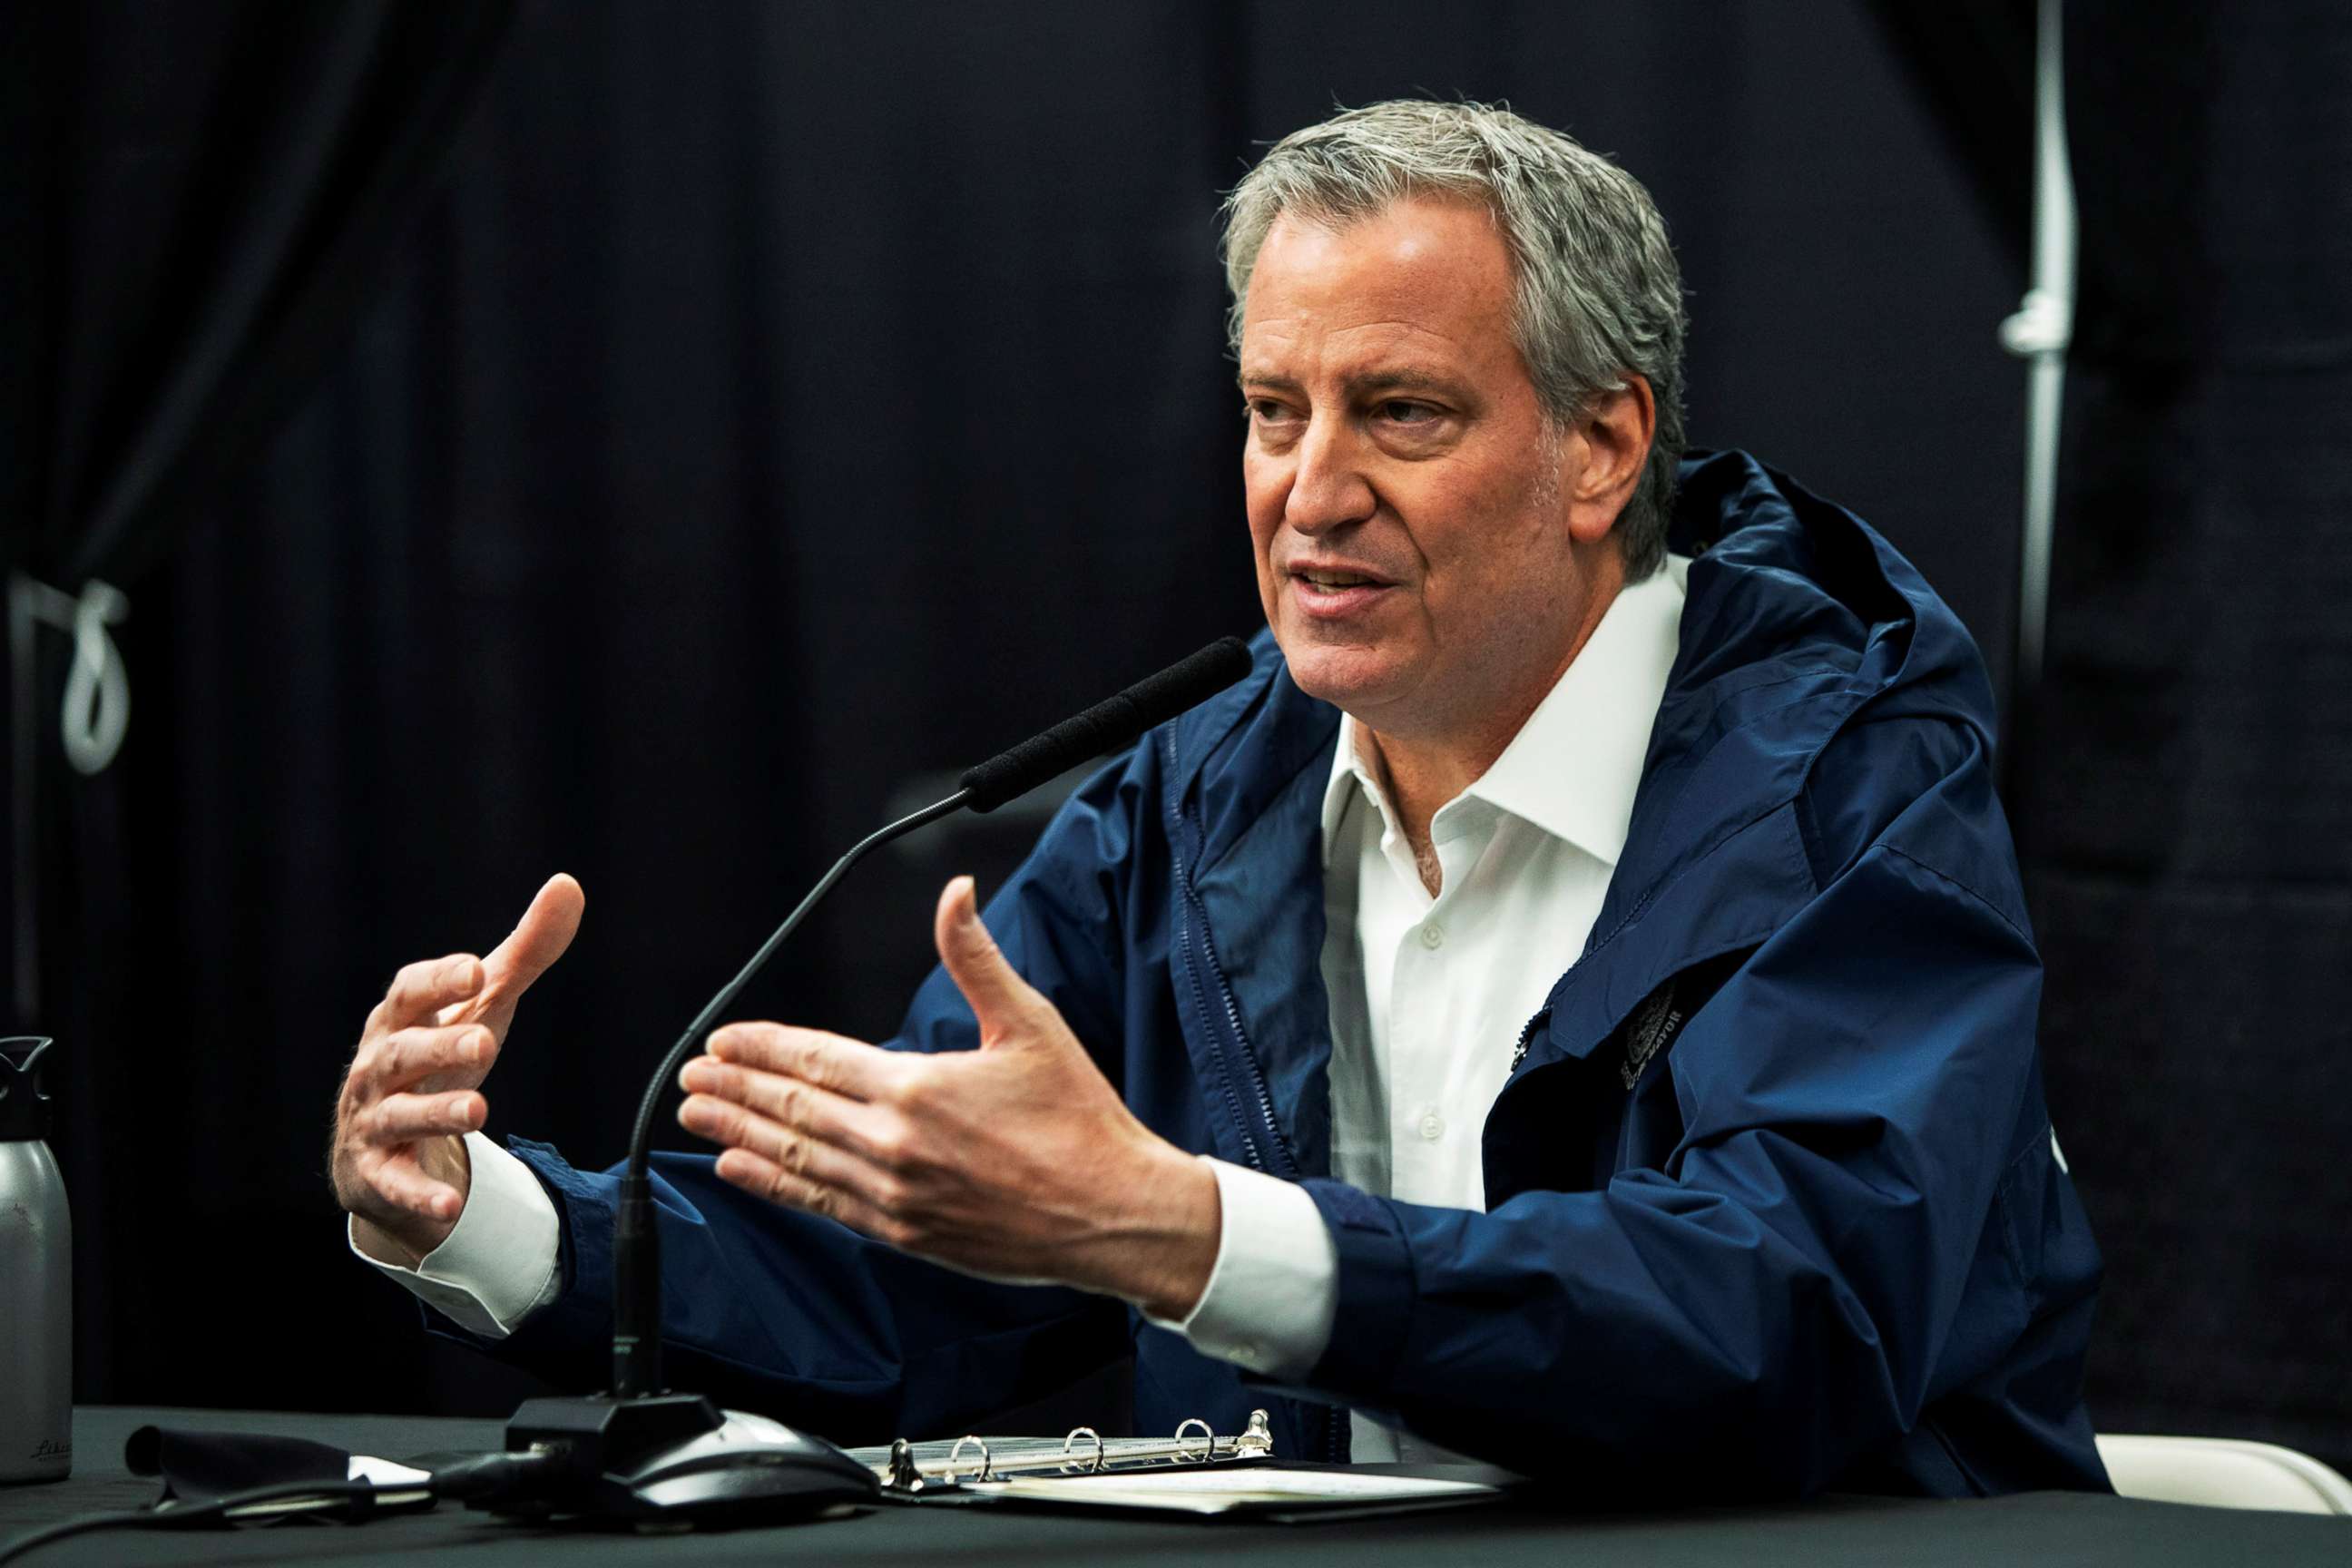 PHOTO: New York City Mayor Bill De Blasio speaks to the media during a press conference in New York, April 10, 2020.